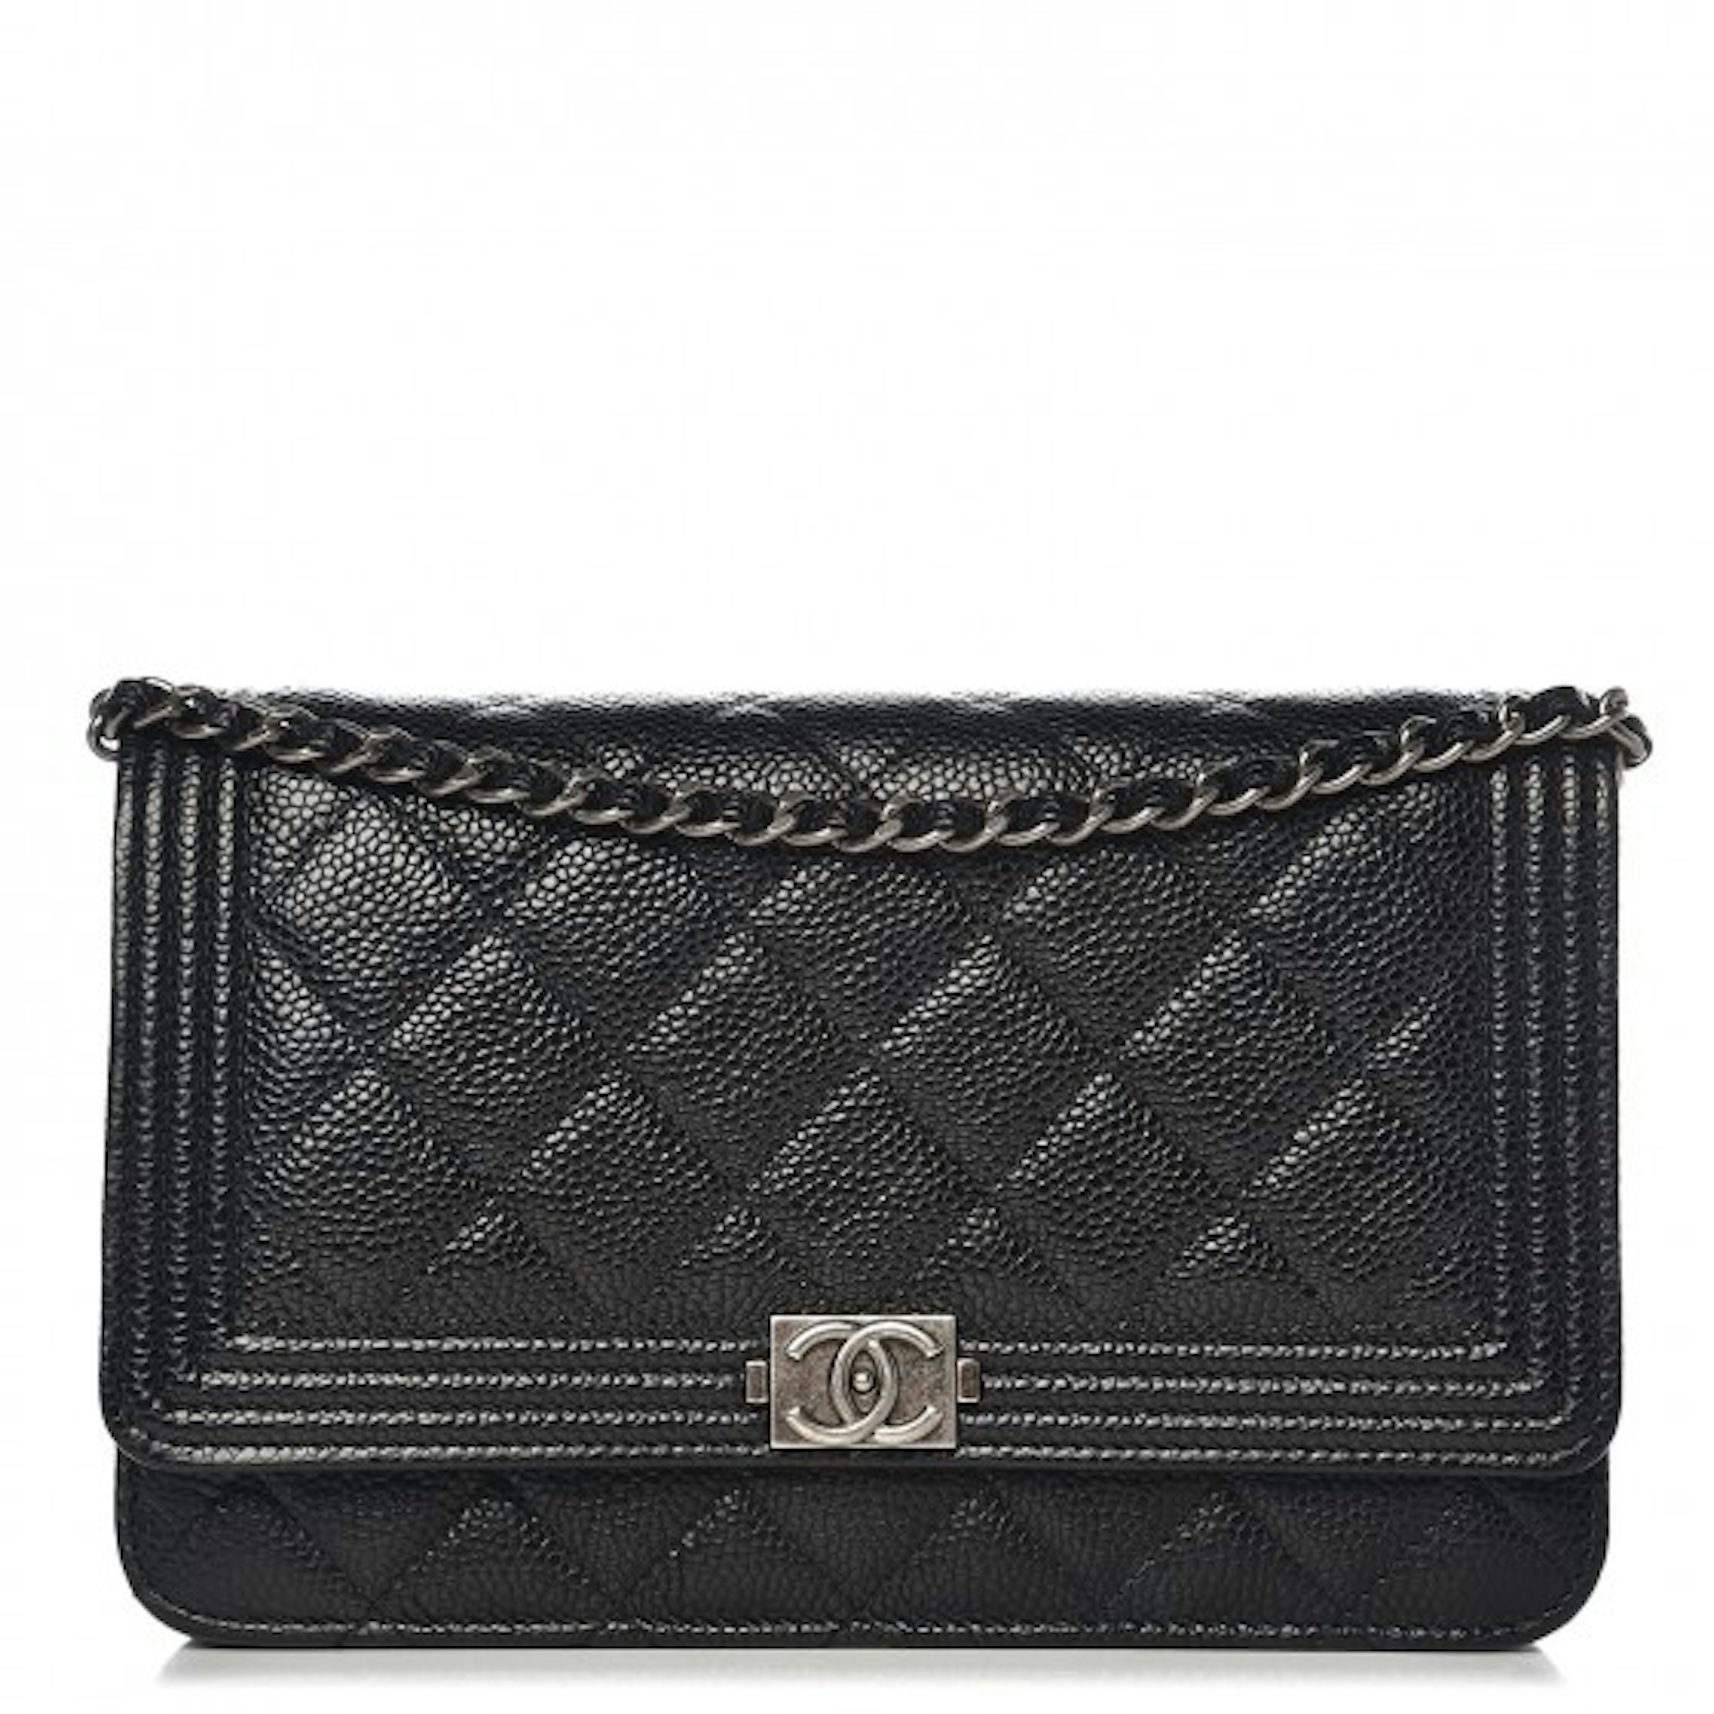 Chanel Silver Chevron Caviar Leather Boy Classic Wallet on Chain Chanel |  The Luxury Closet